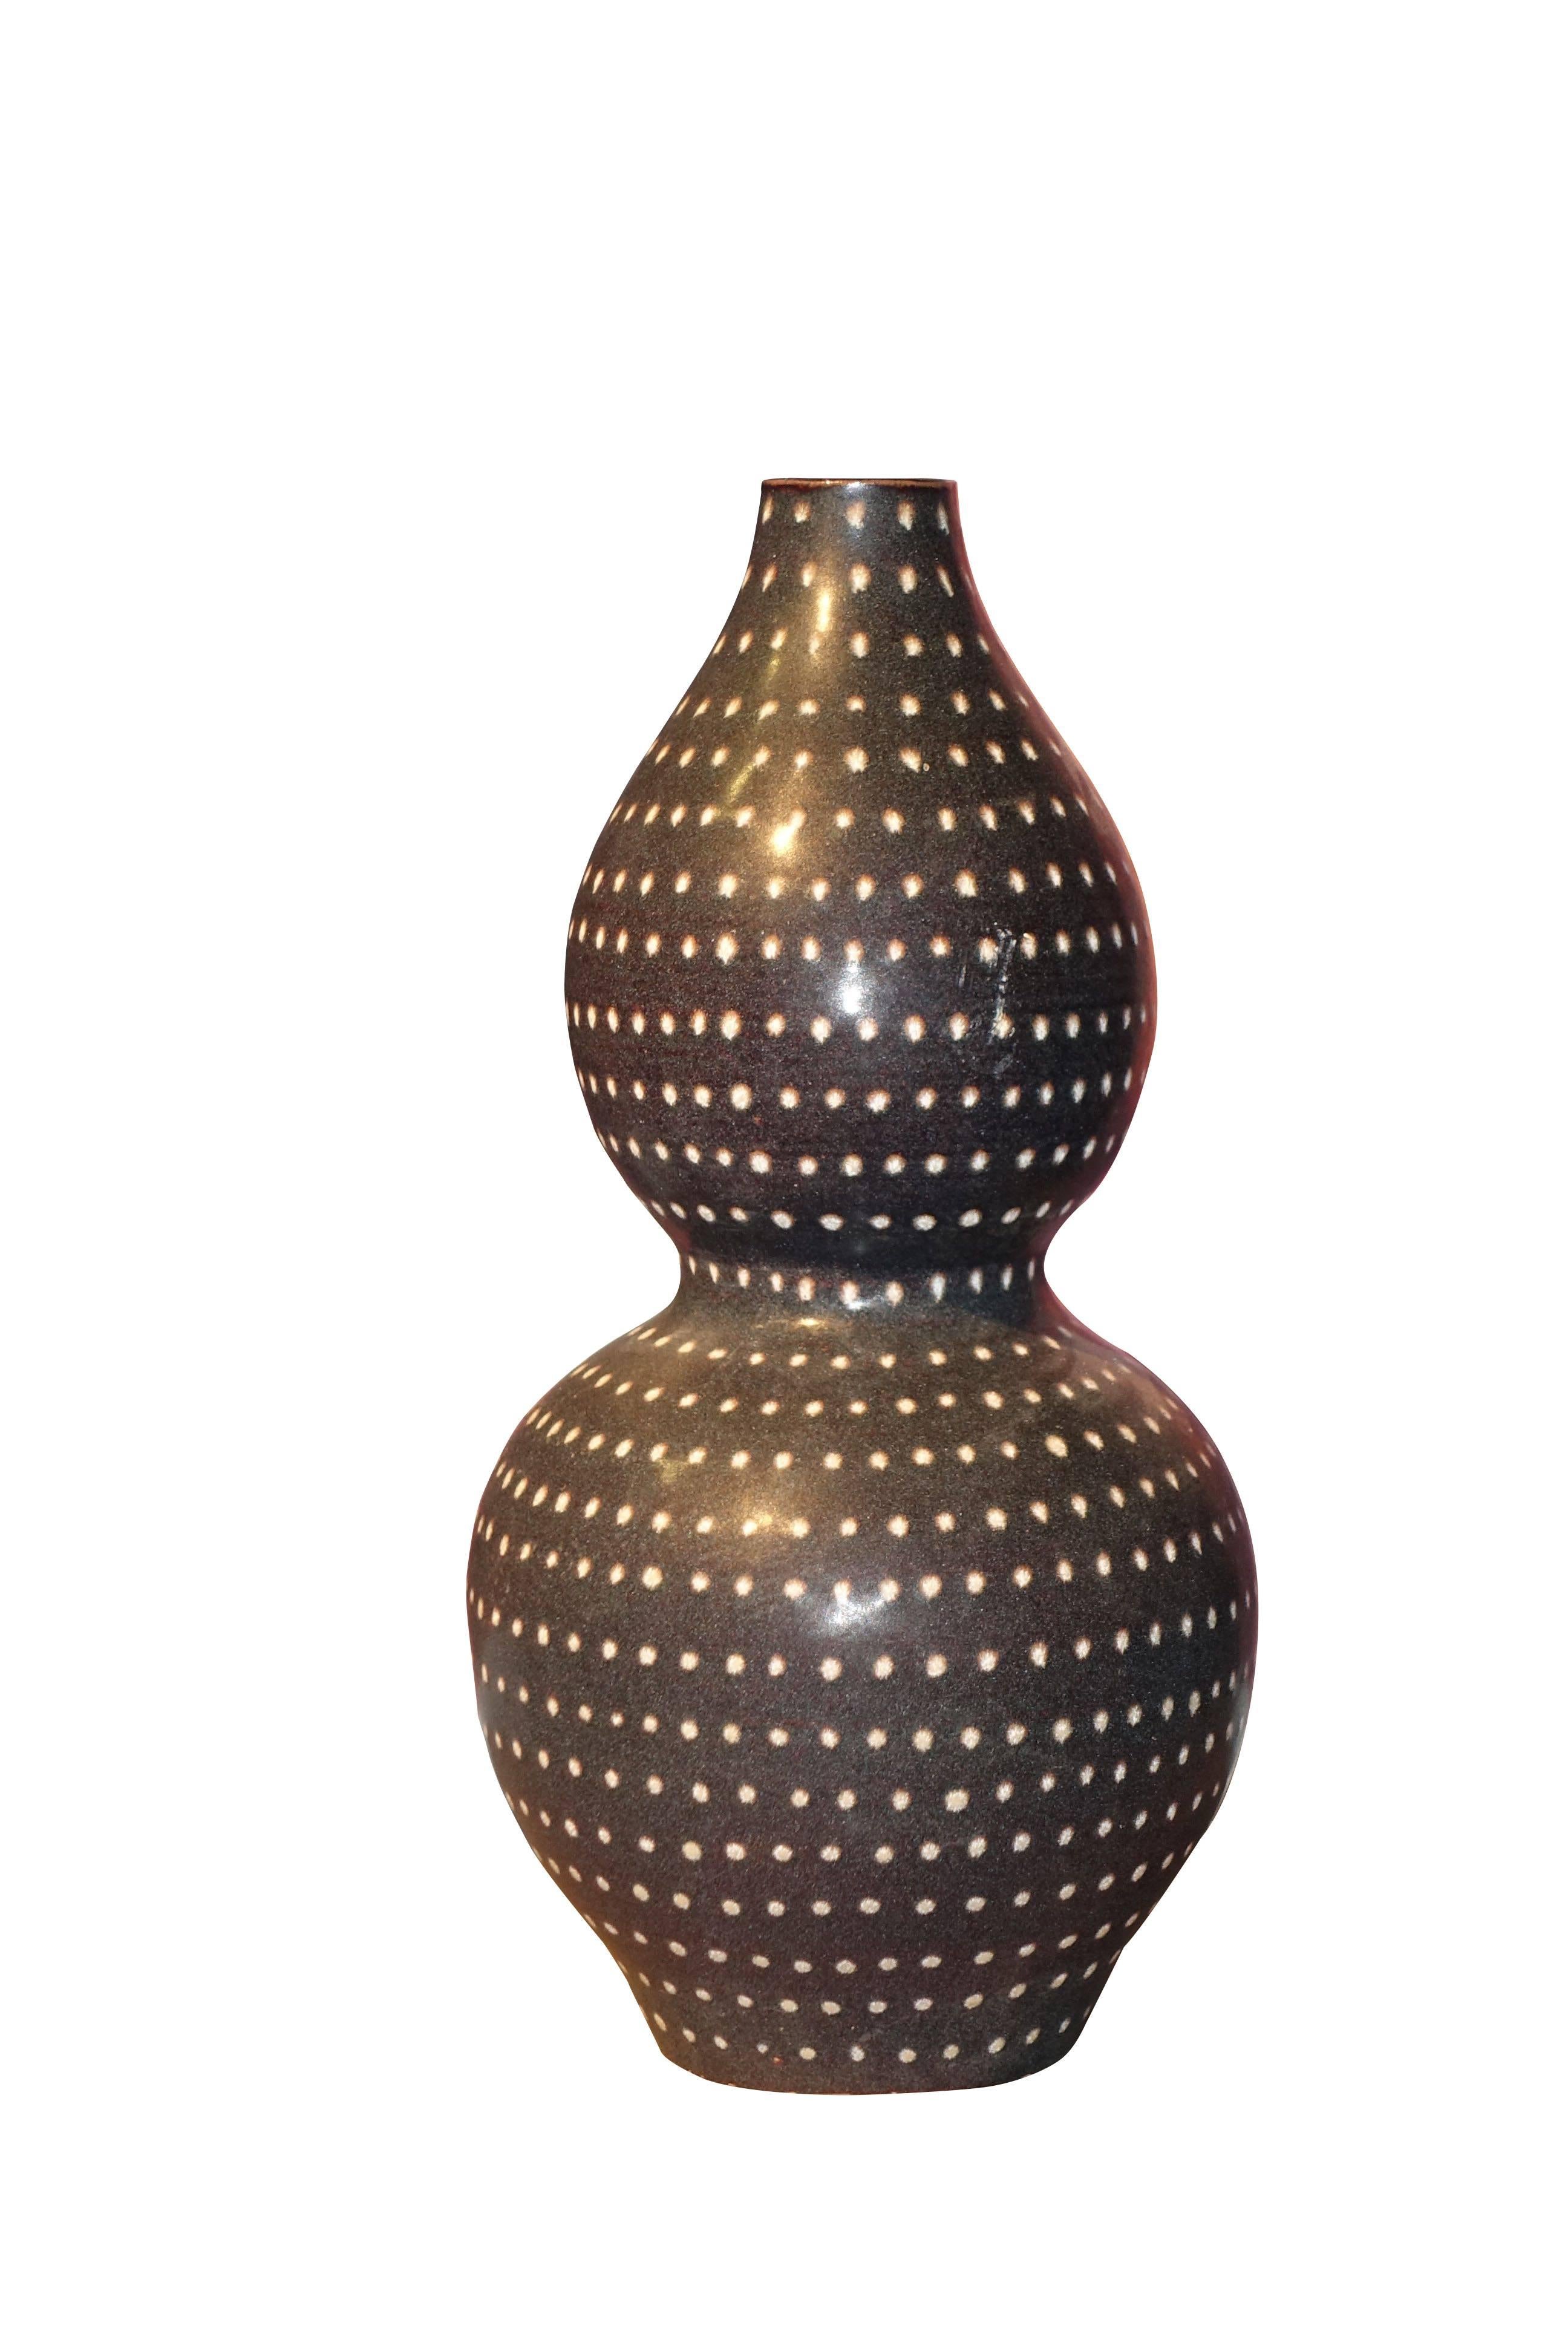 Contemporary Chinese collection of handmade pin dotted vases.
Deep espresso color with cream dots all applied using fine quilled paint brush.
Pieces sold individually and make a very decorative collection.
Measure: S4941A 13